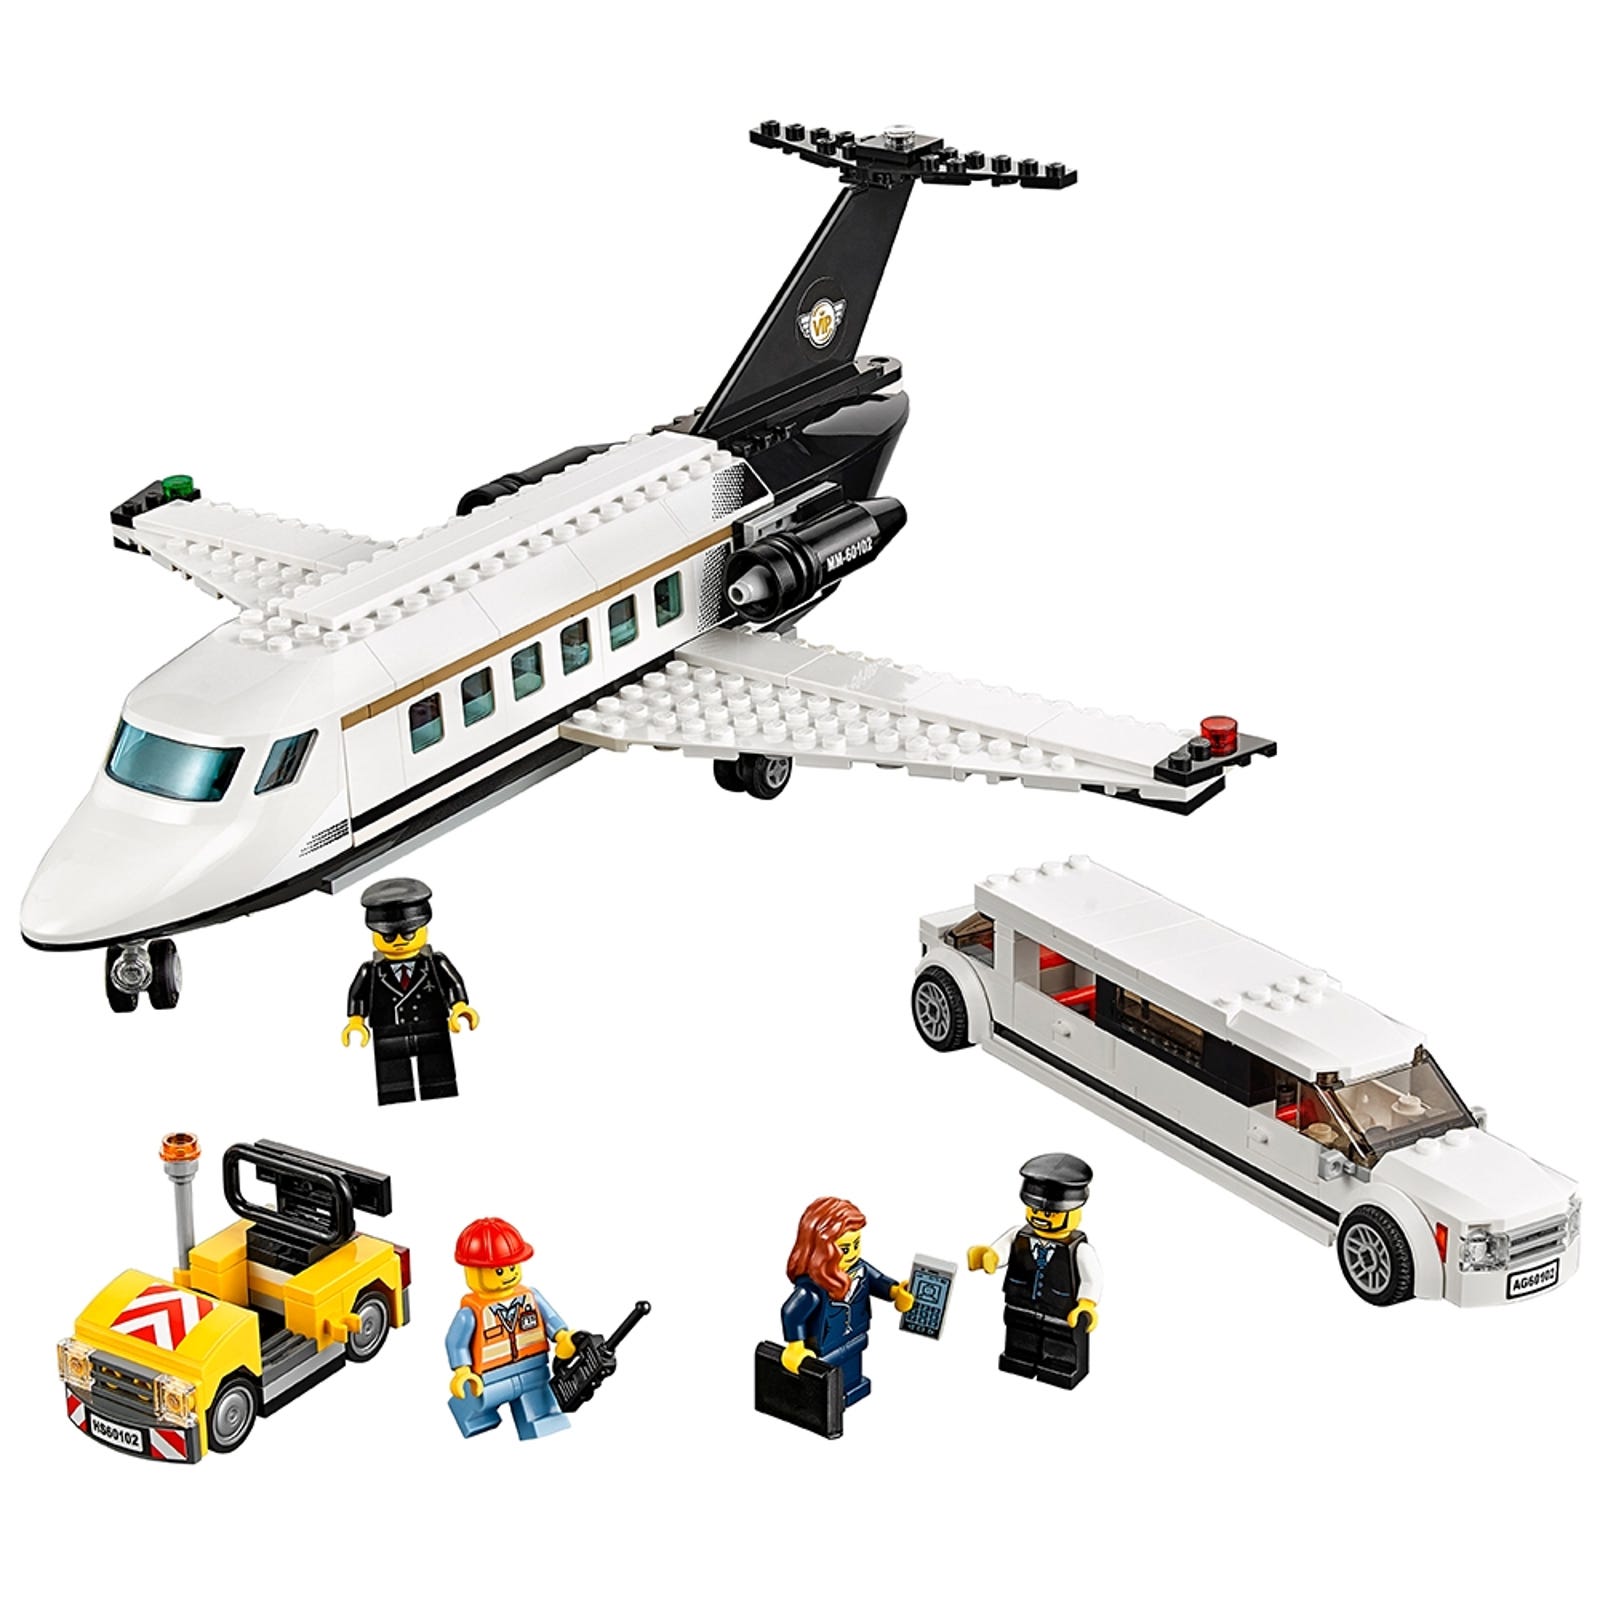 LEGO City Airport VIP Service review! 60102